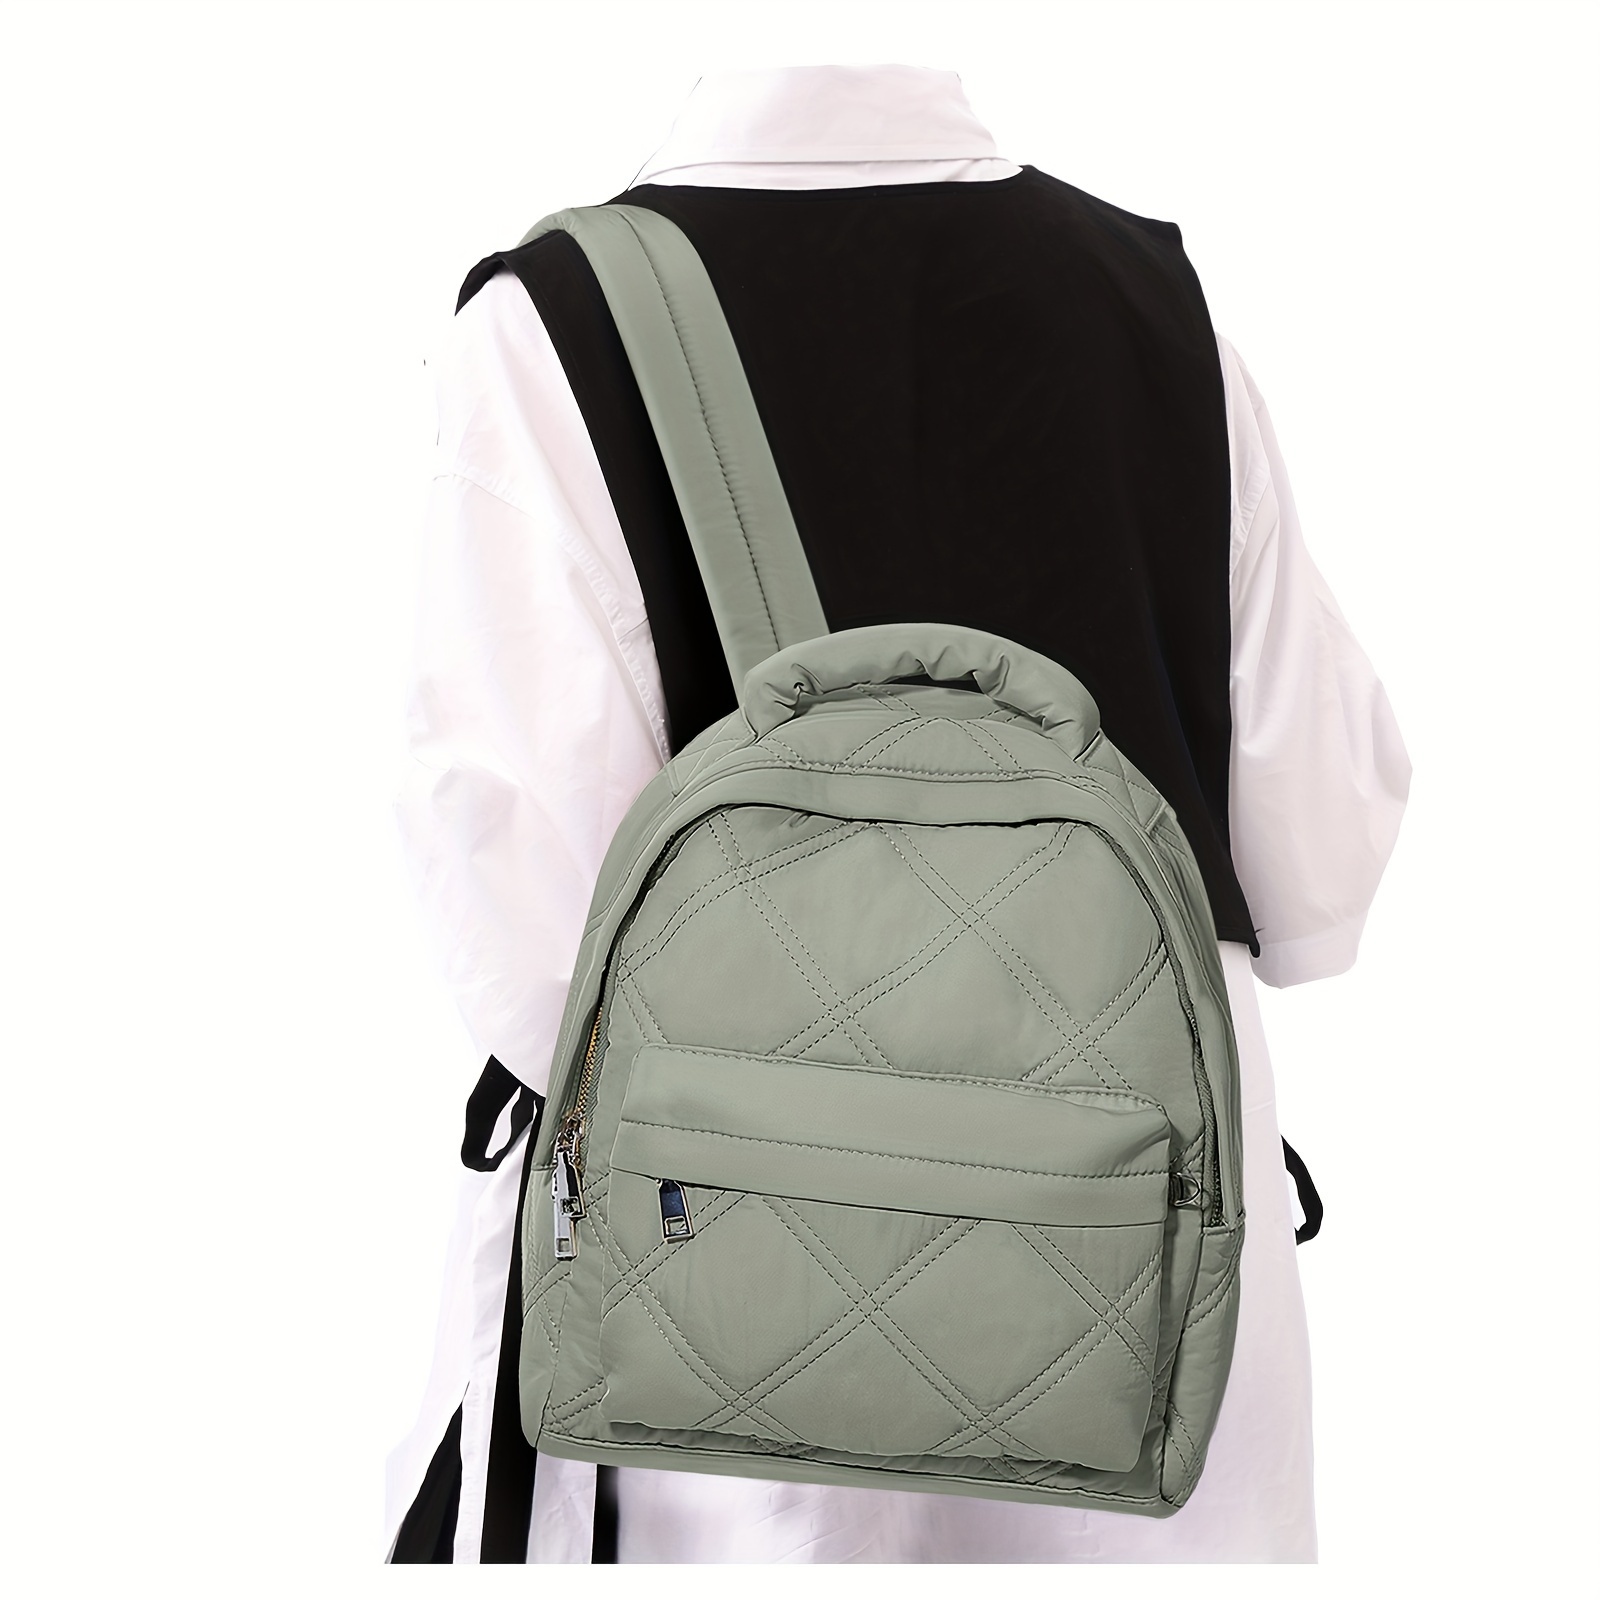 Quilted multi-pocket backpack